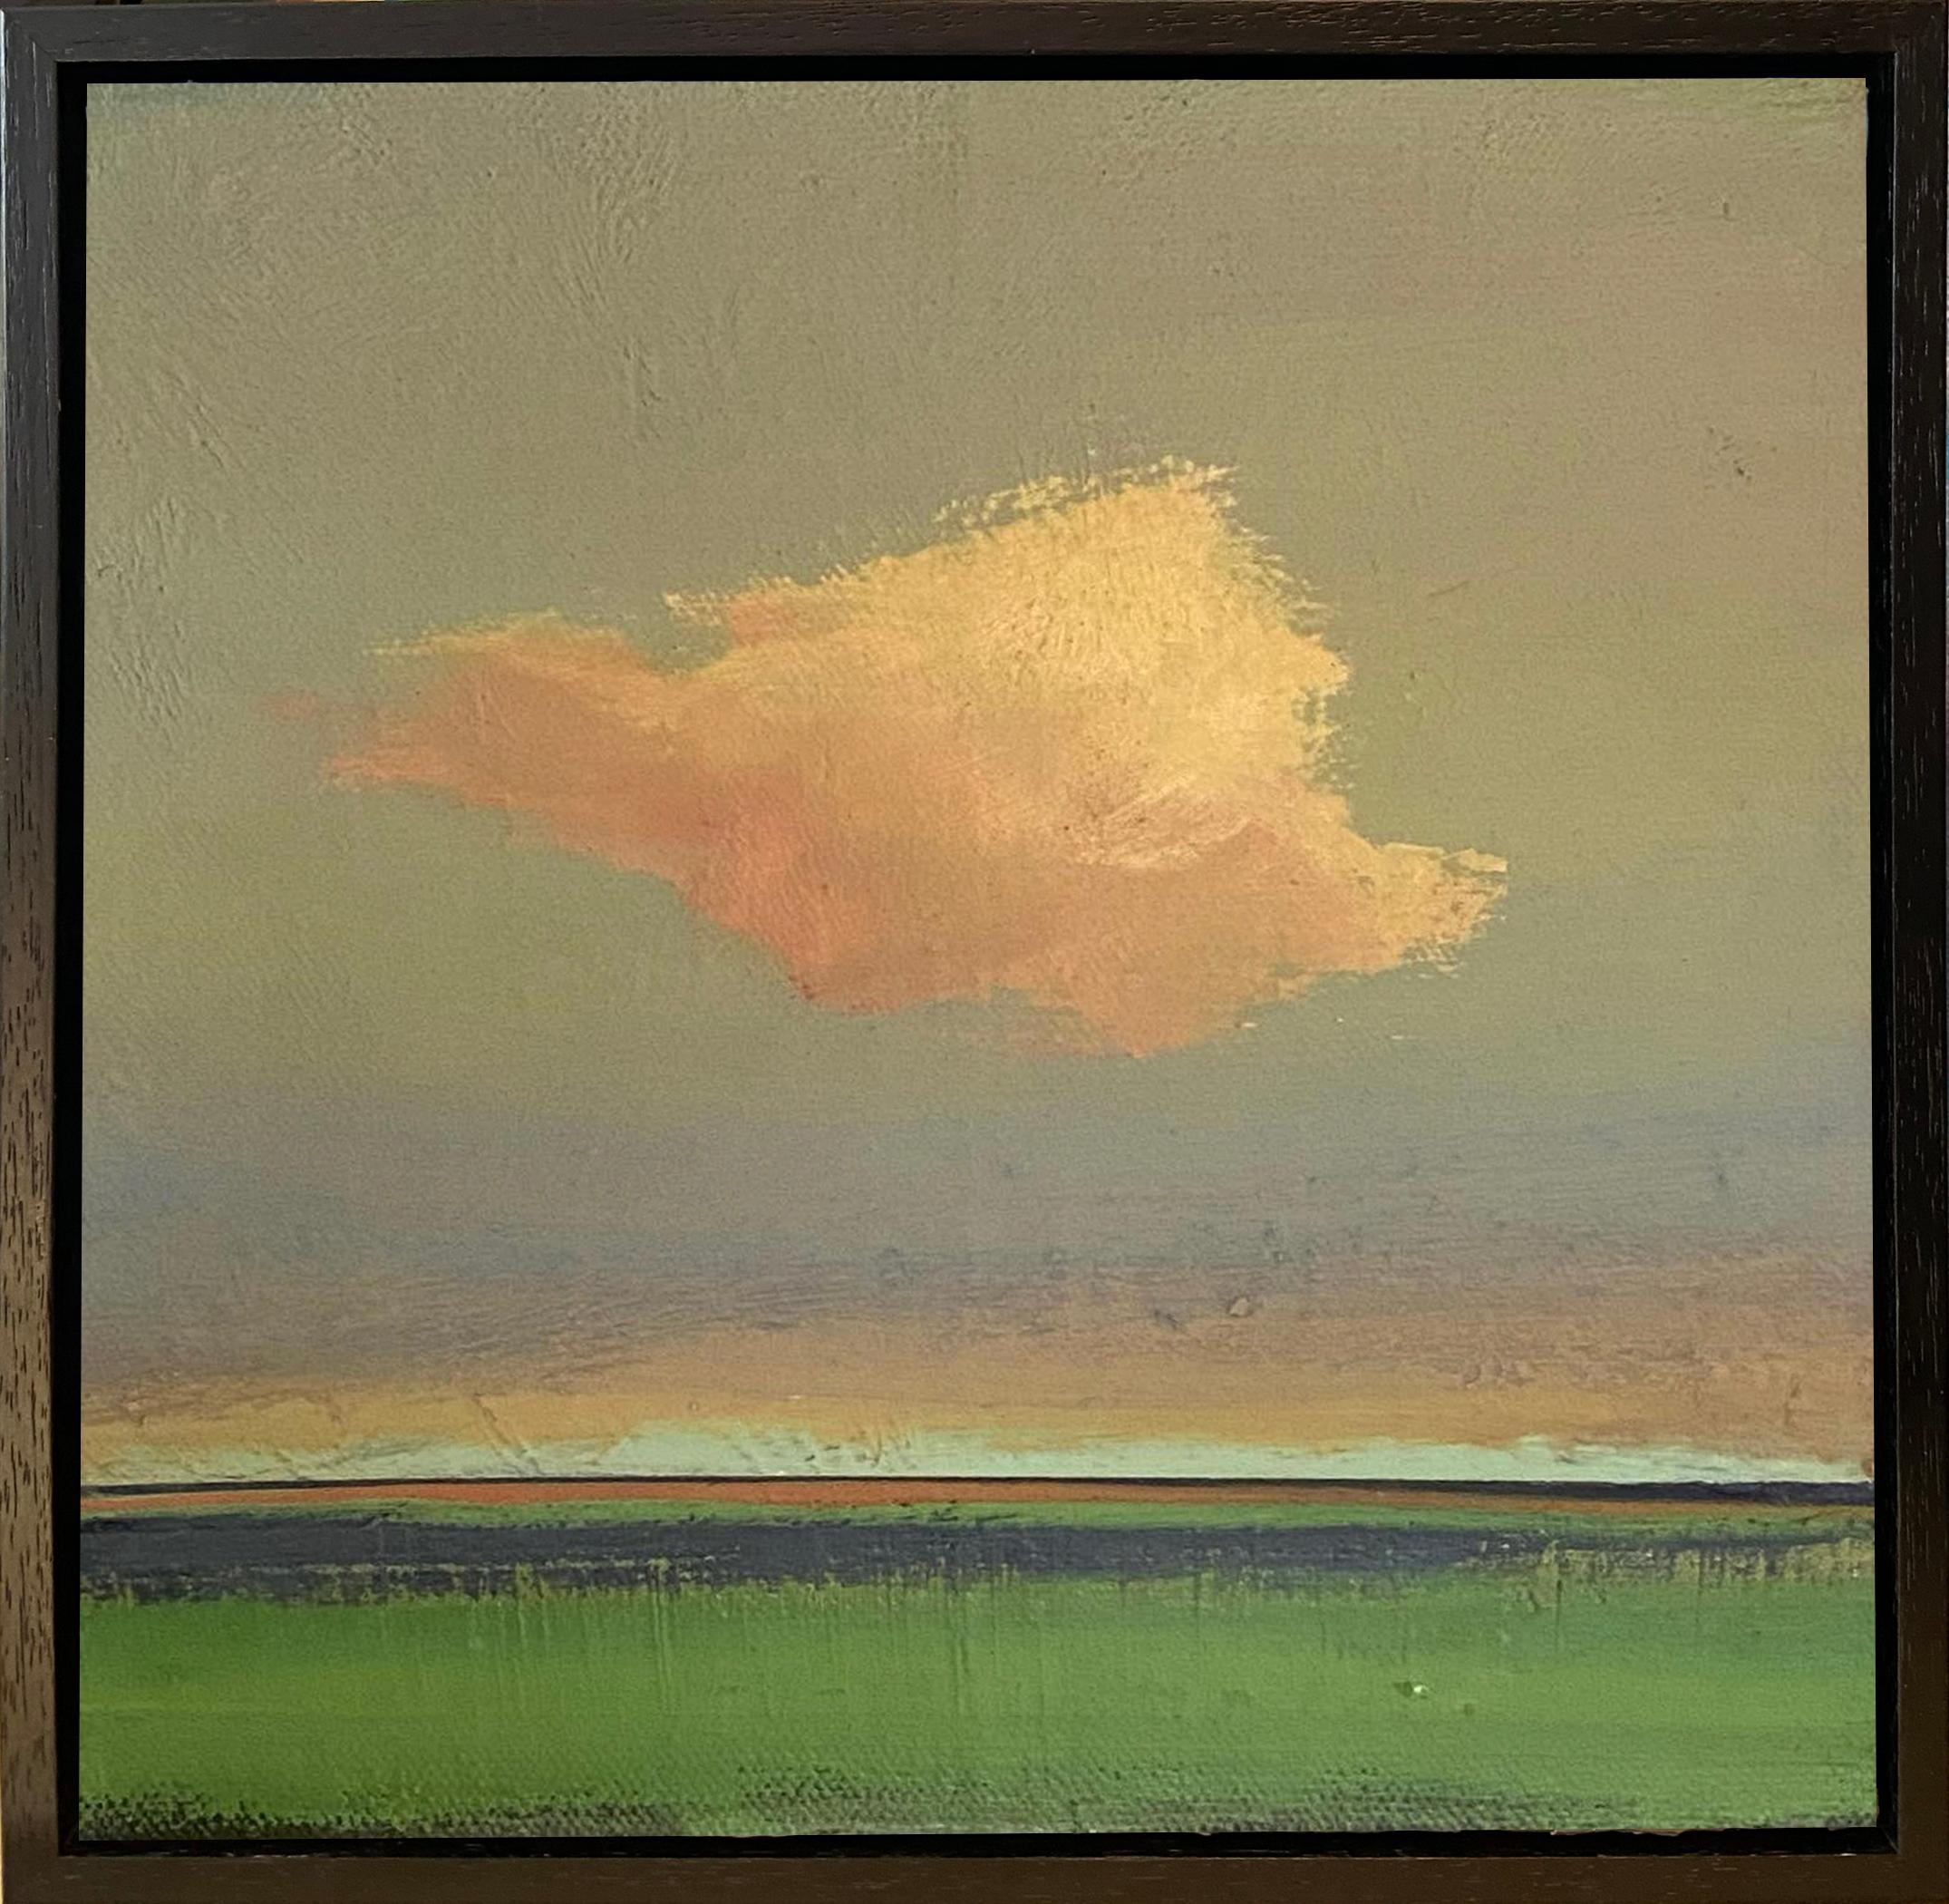 Alyson Kinkade Landscape Painting - Piece of the Sky no.12, 12x12", oil on linen